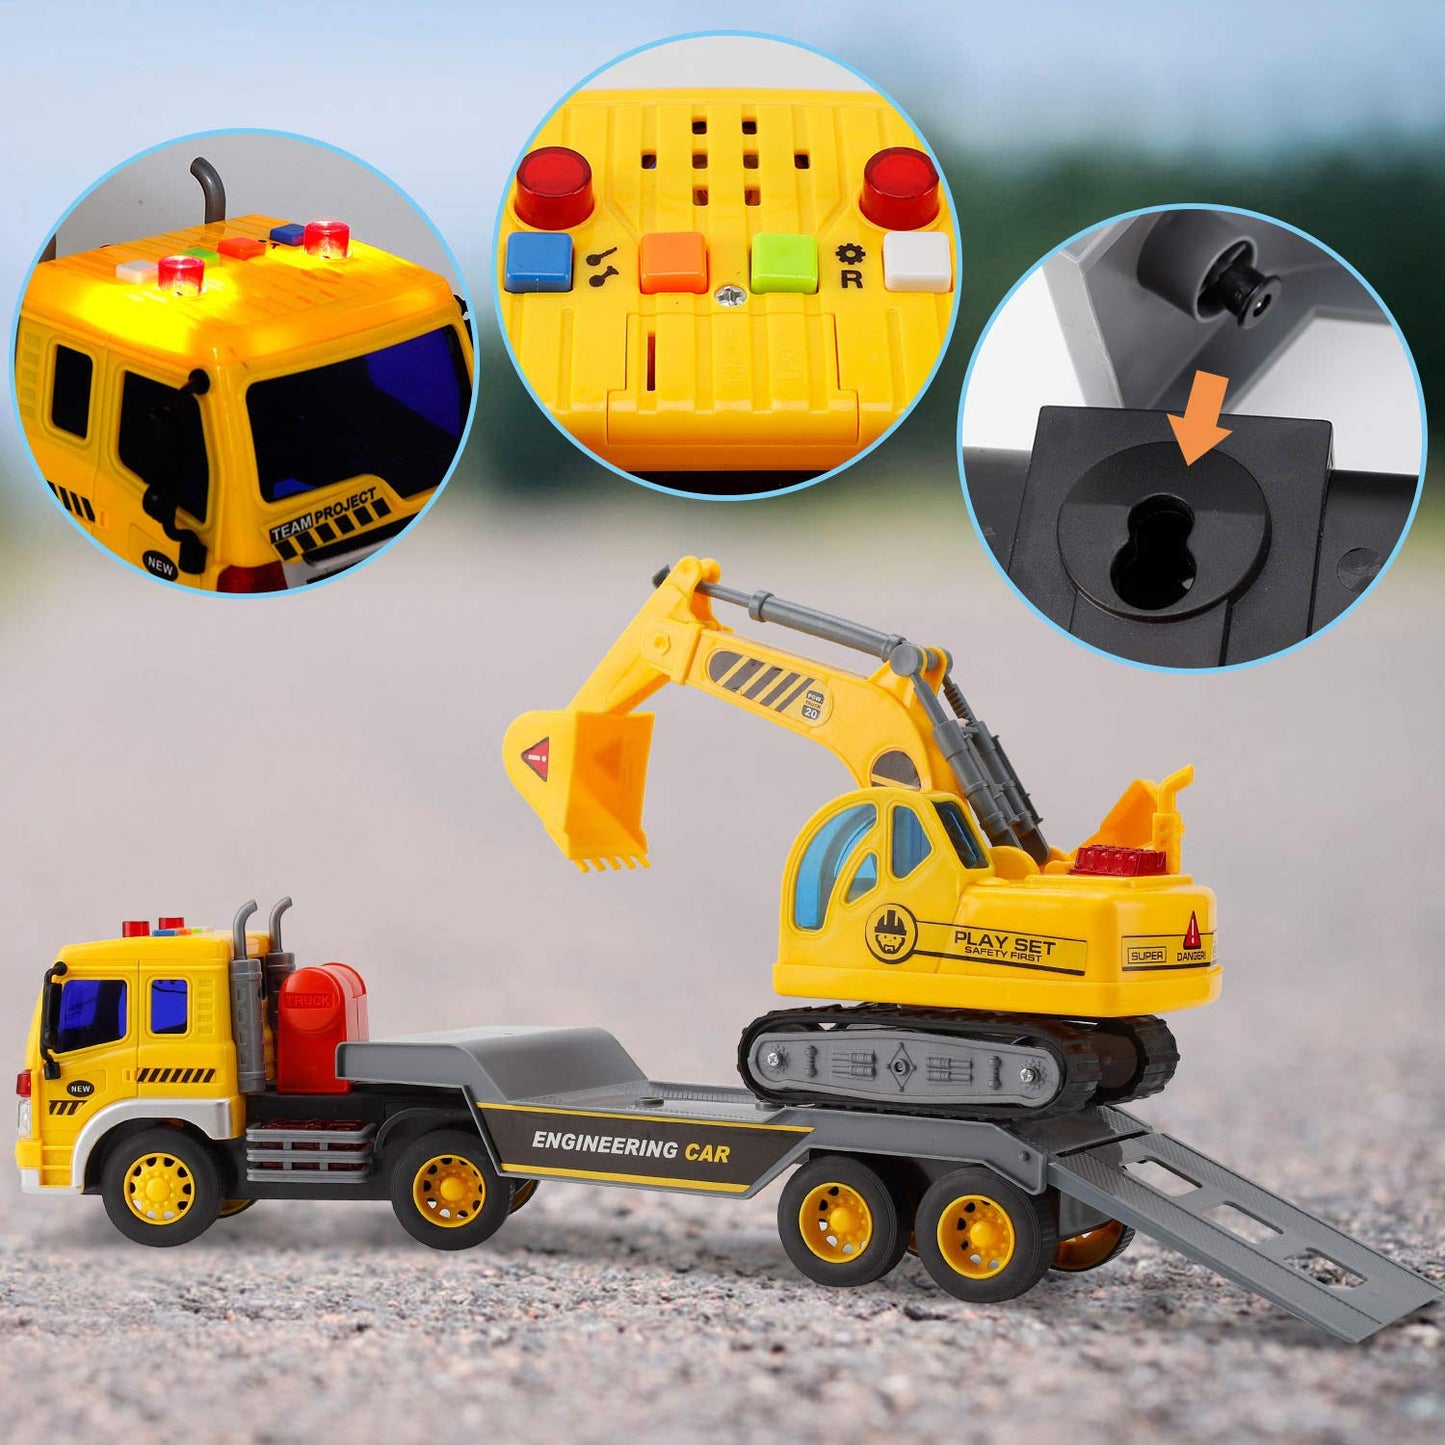 2-in-1 Friction Powered Toy Construction Truck Vehicle with Excavator with Lights and Sounds